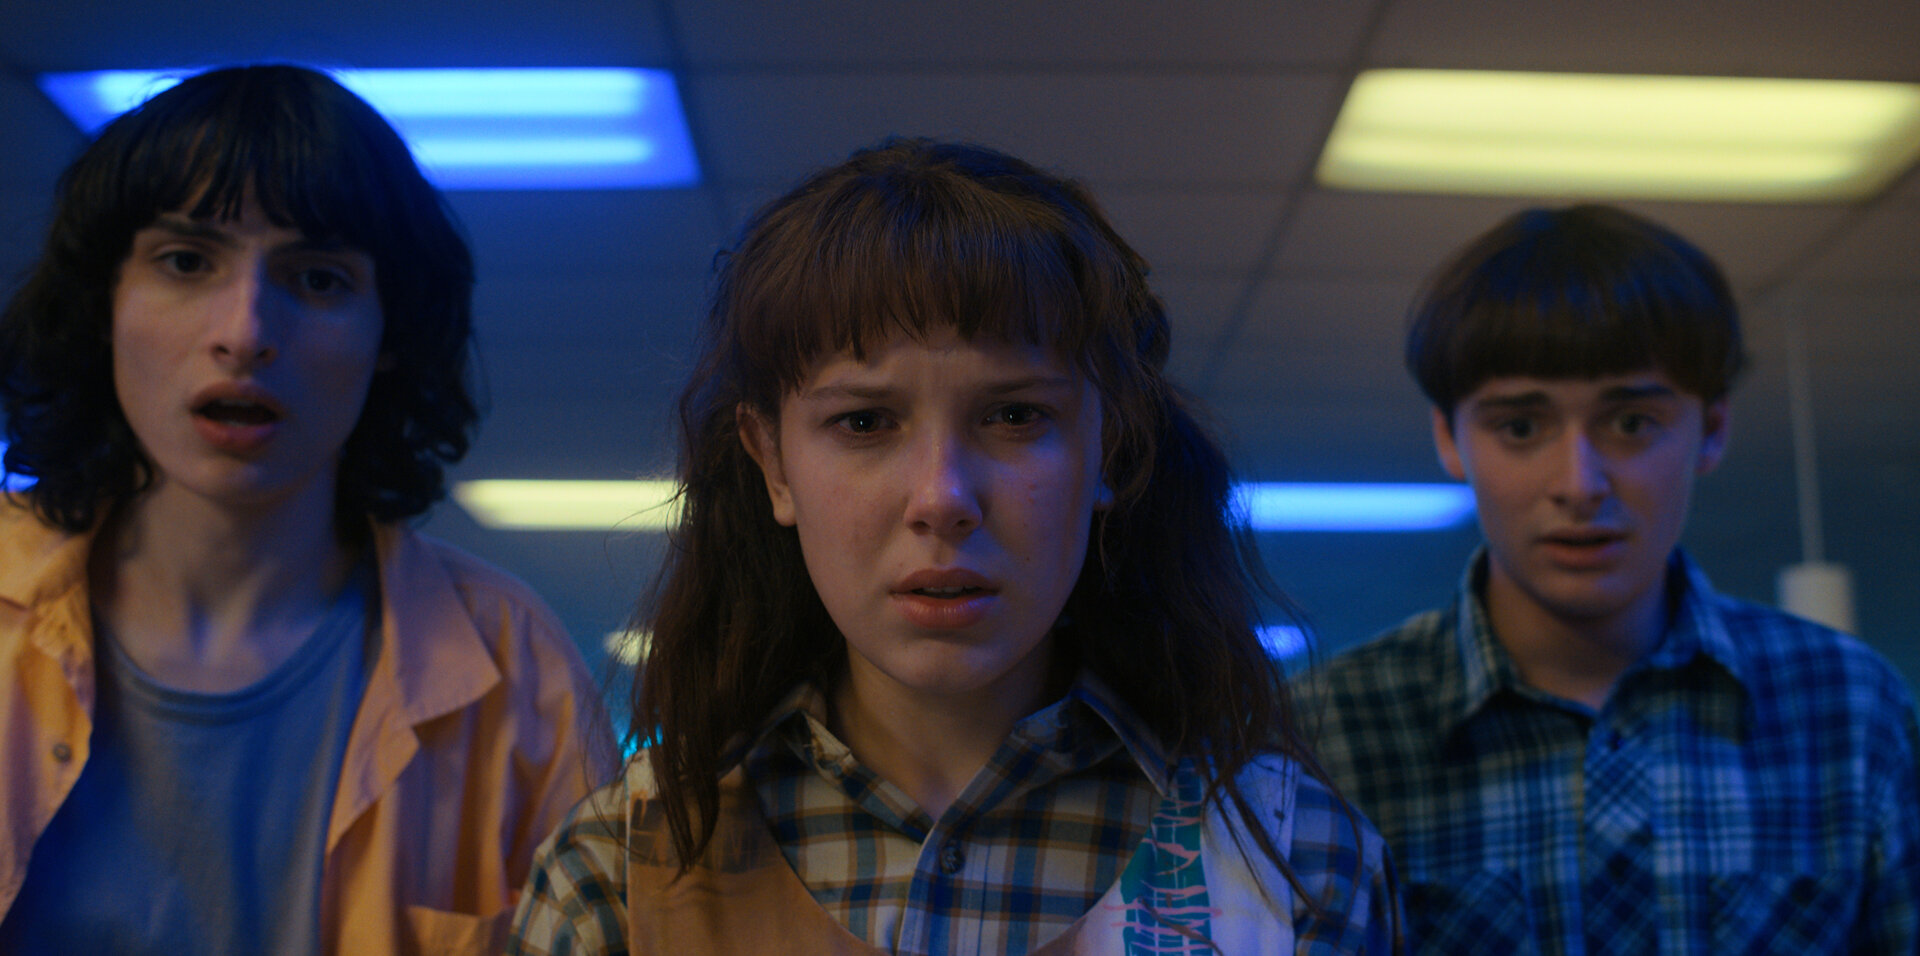 Don’t miss the great post-credits scene at the end of Stranger Things 4: Volume 1